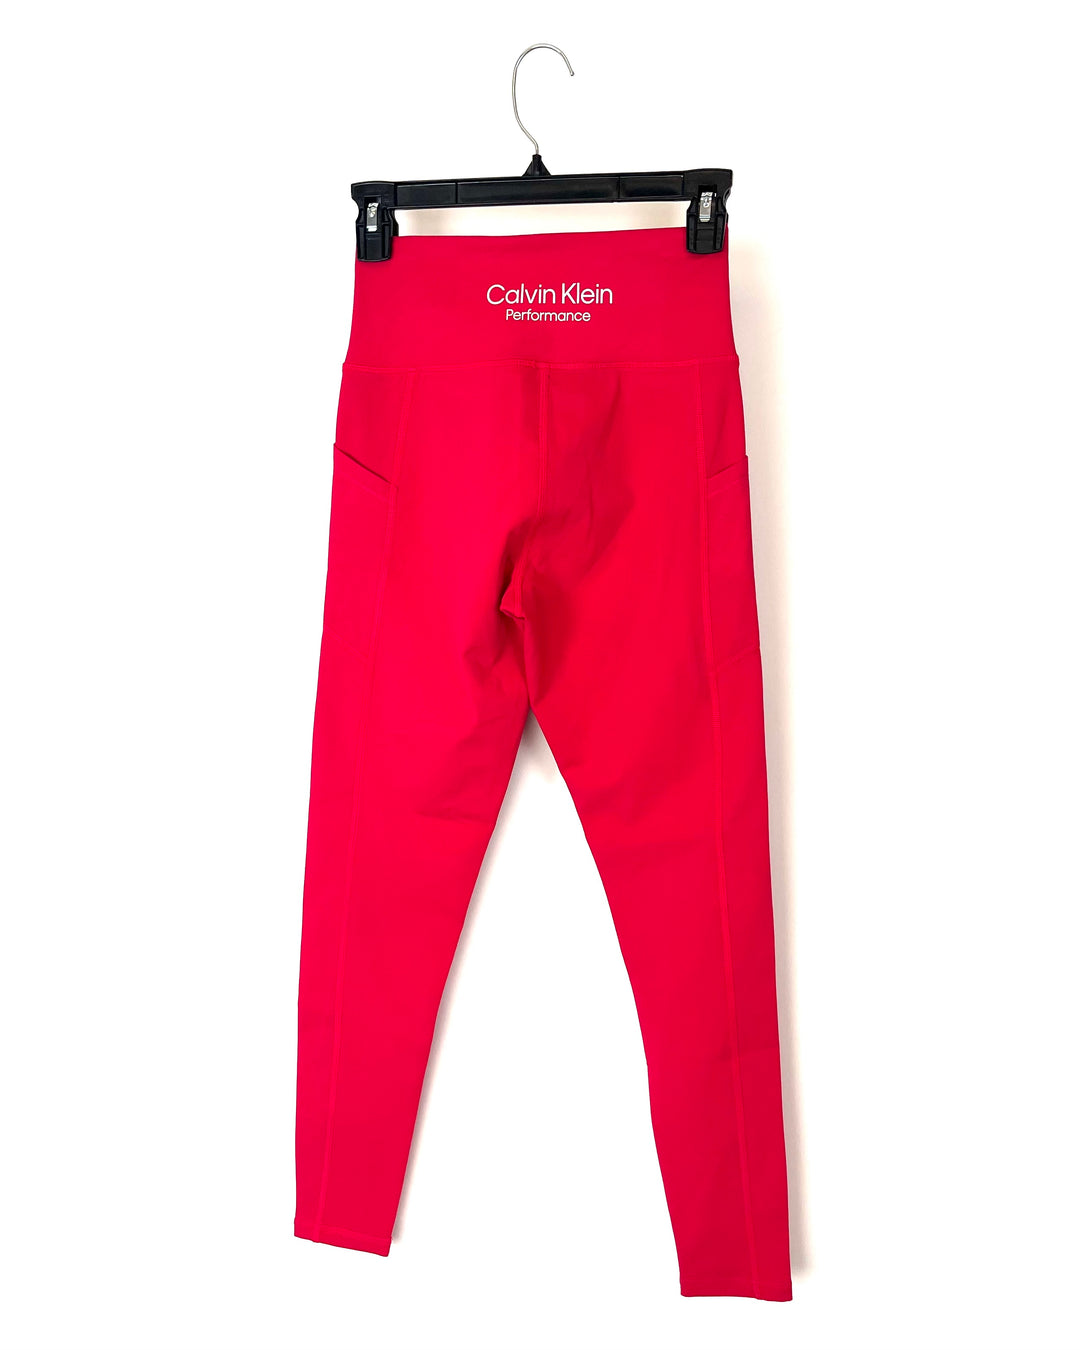 Hot Pink Activewear Leggings With Pockets - Small